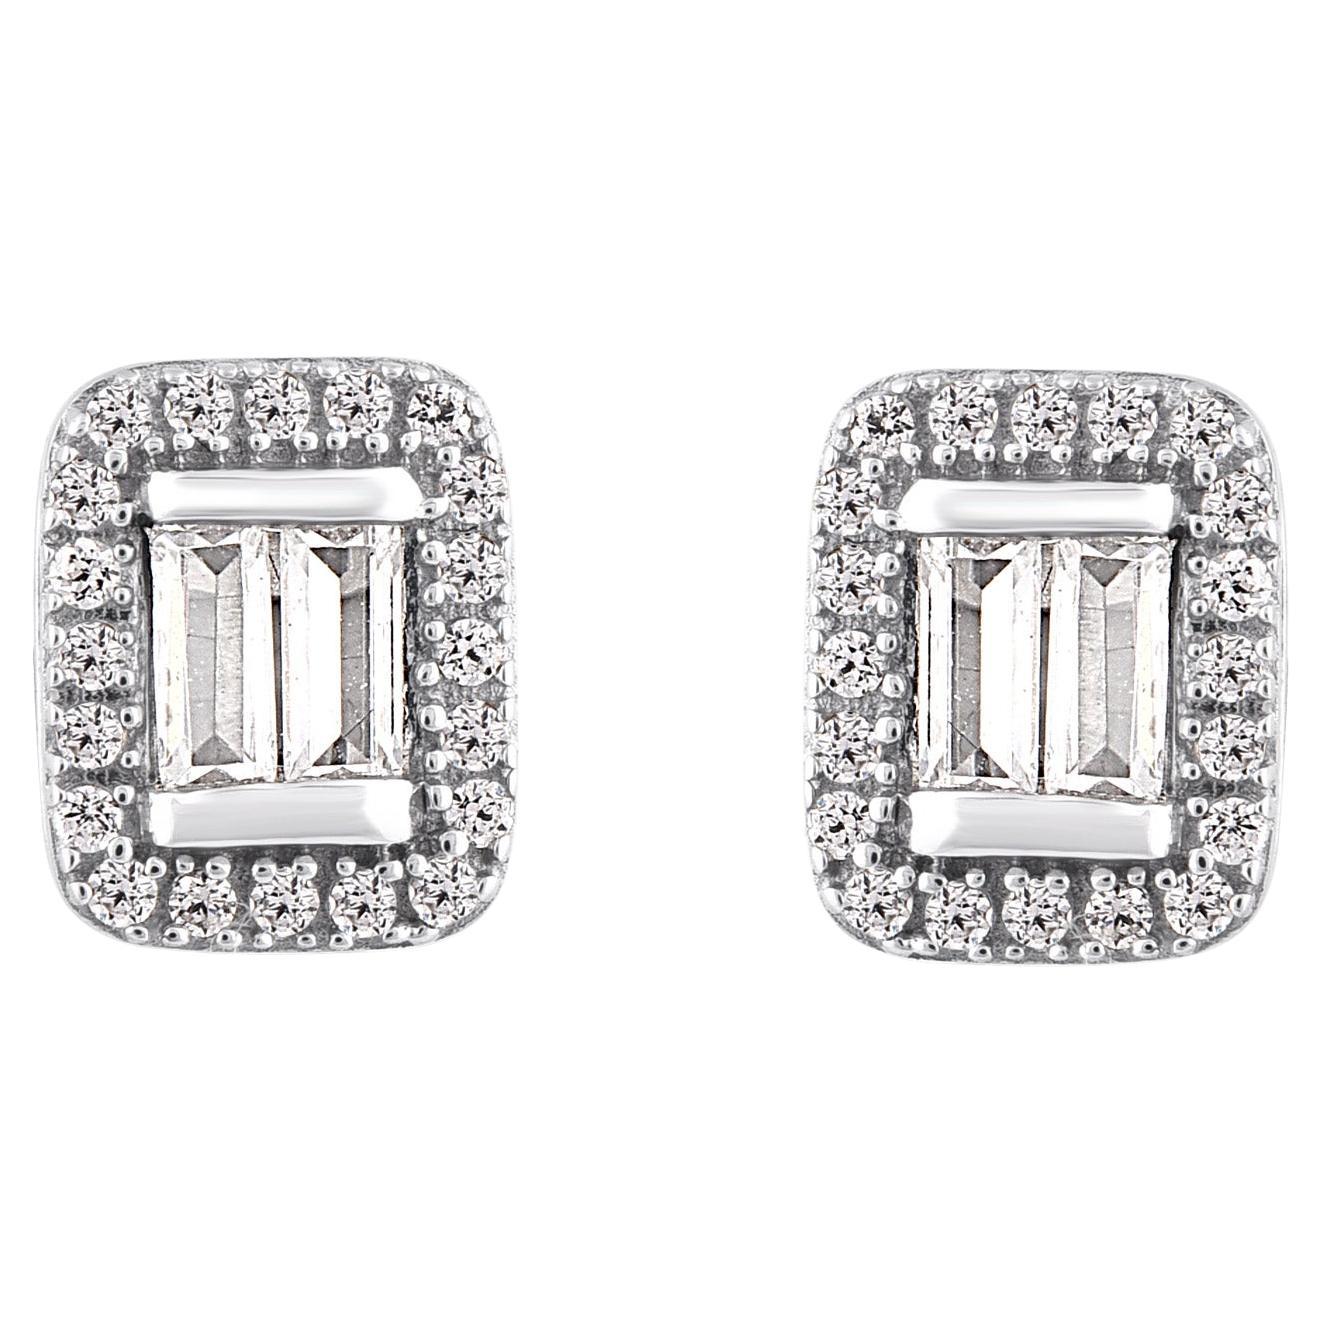 TJD 0.33 Carat Baguette and Round Diamond 14KT White Gold Halo Stud earrings